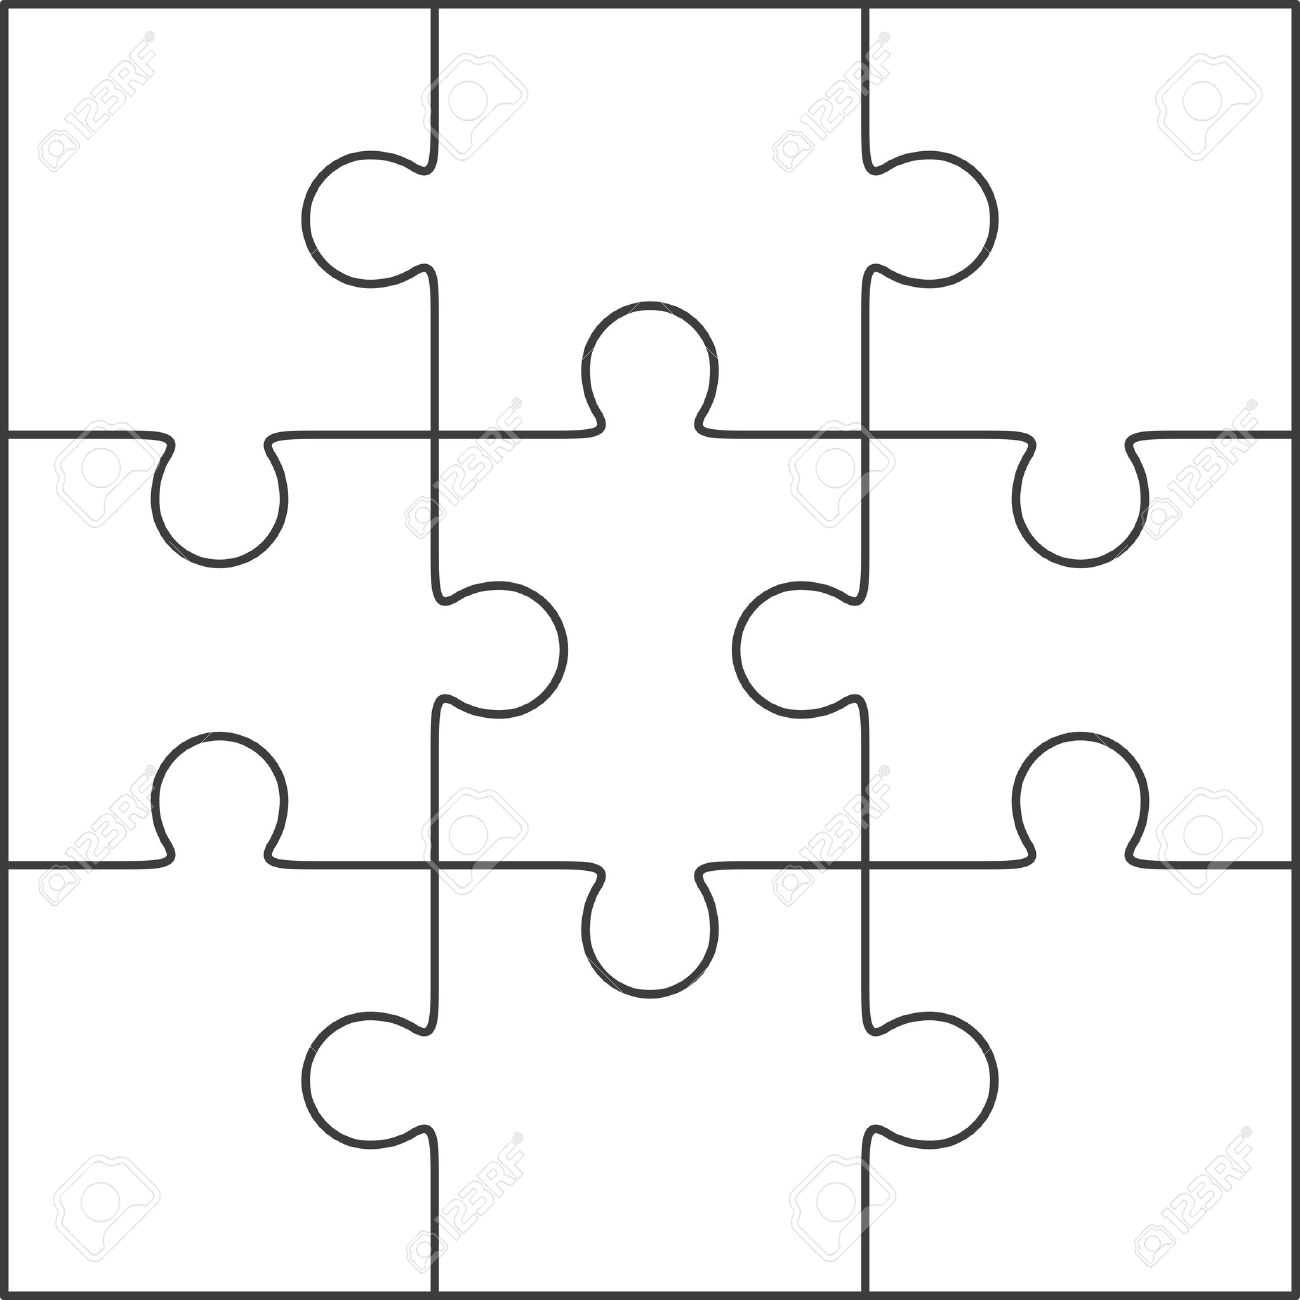 Jigsaw Puzzle Vector, Blank Simple Template 3X3 With Regard To Blank Jigsaw Piece Template